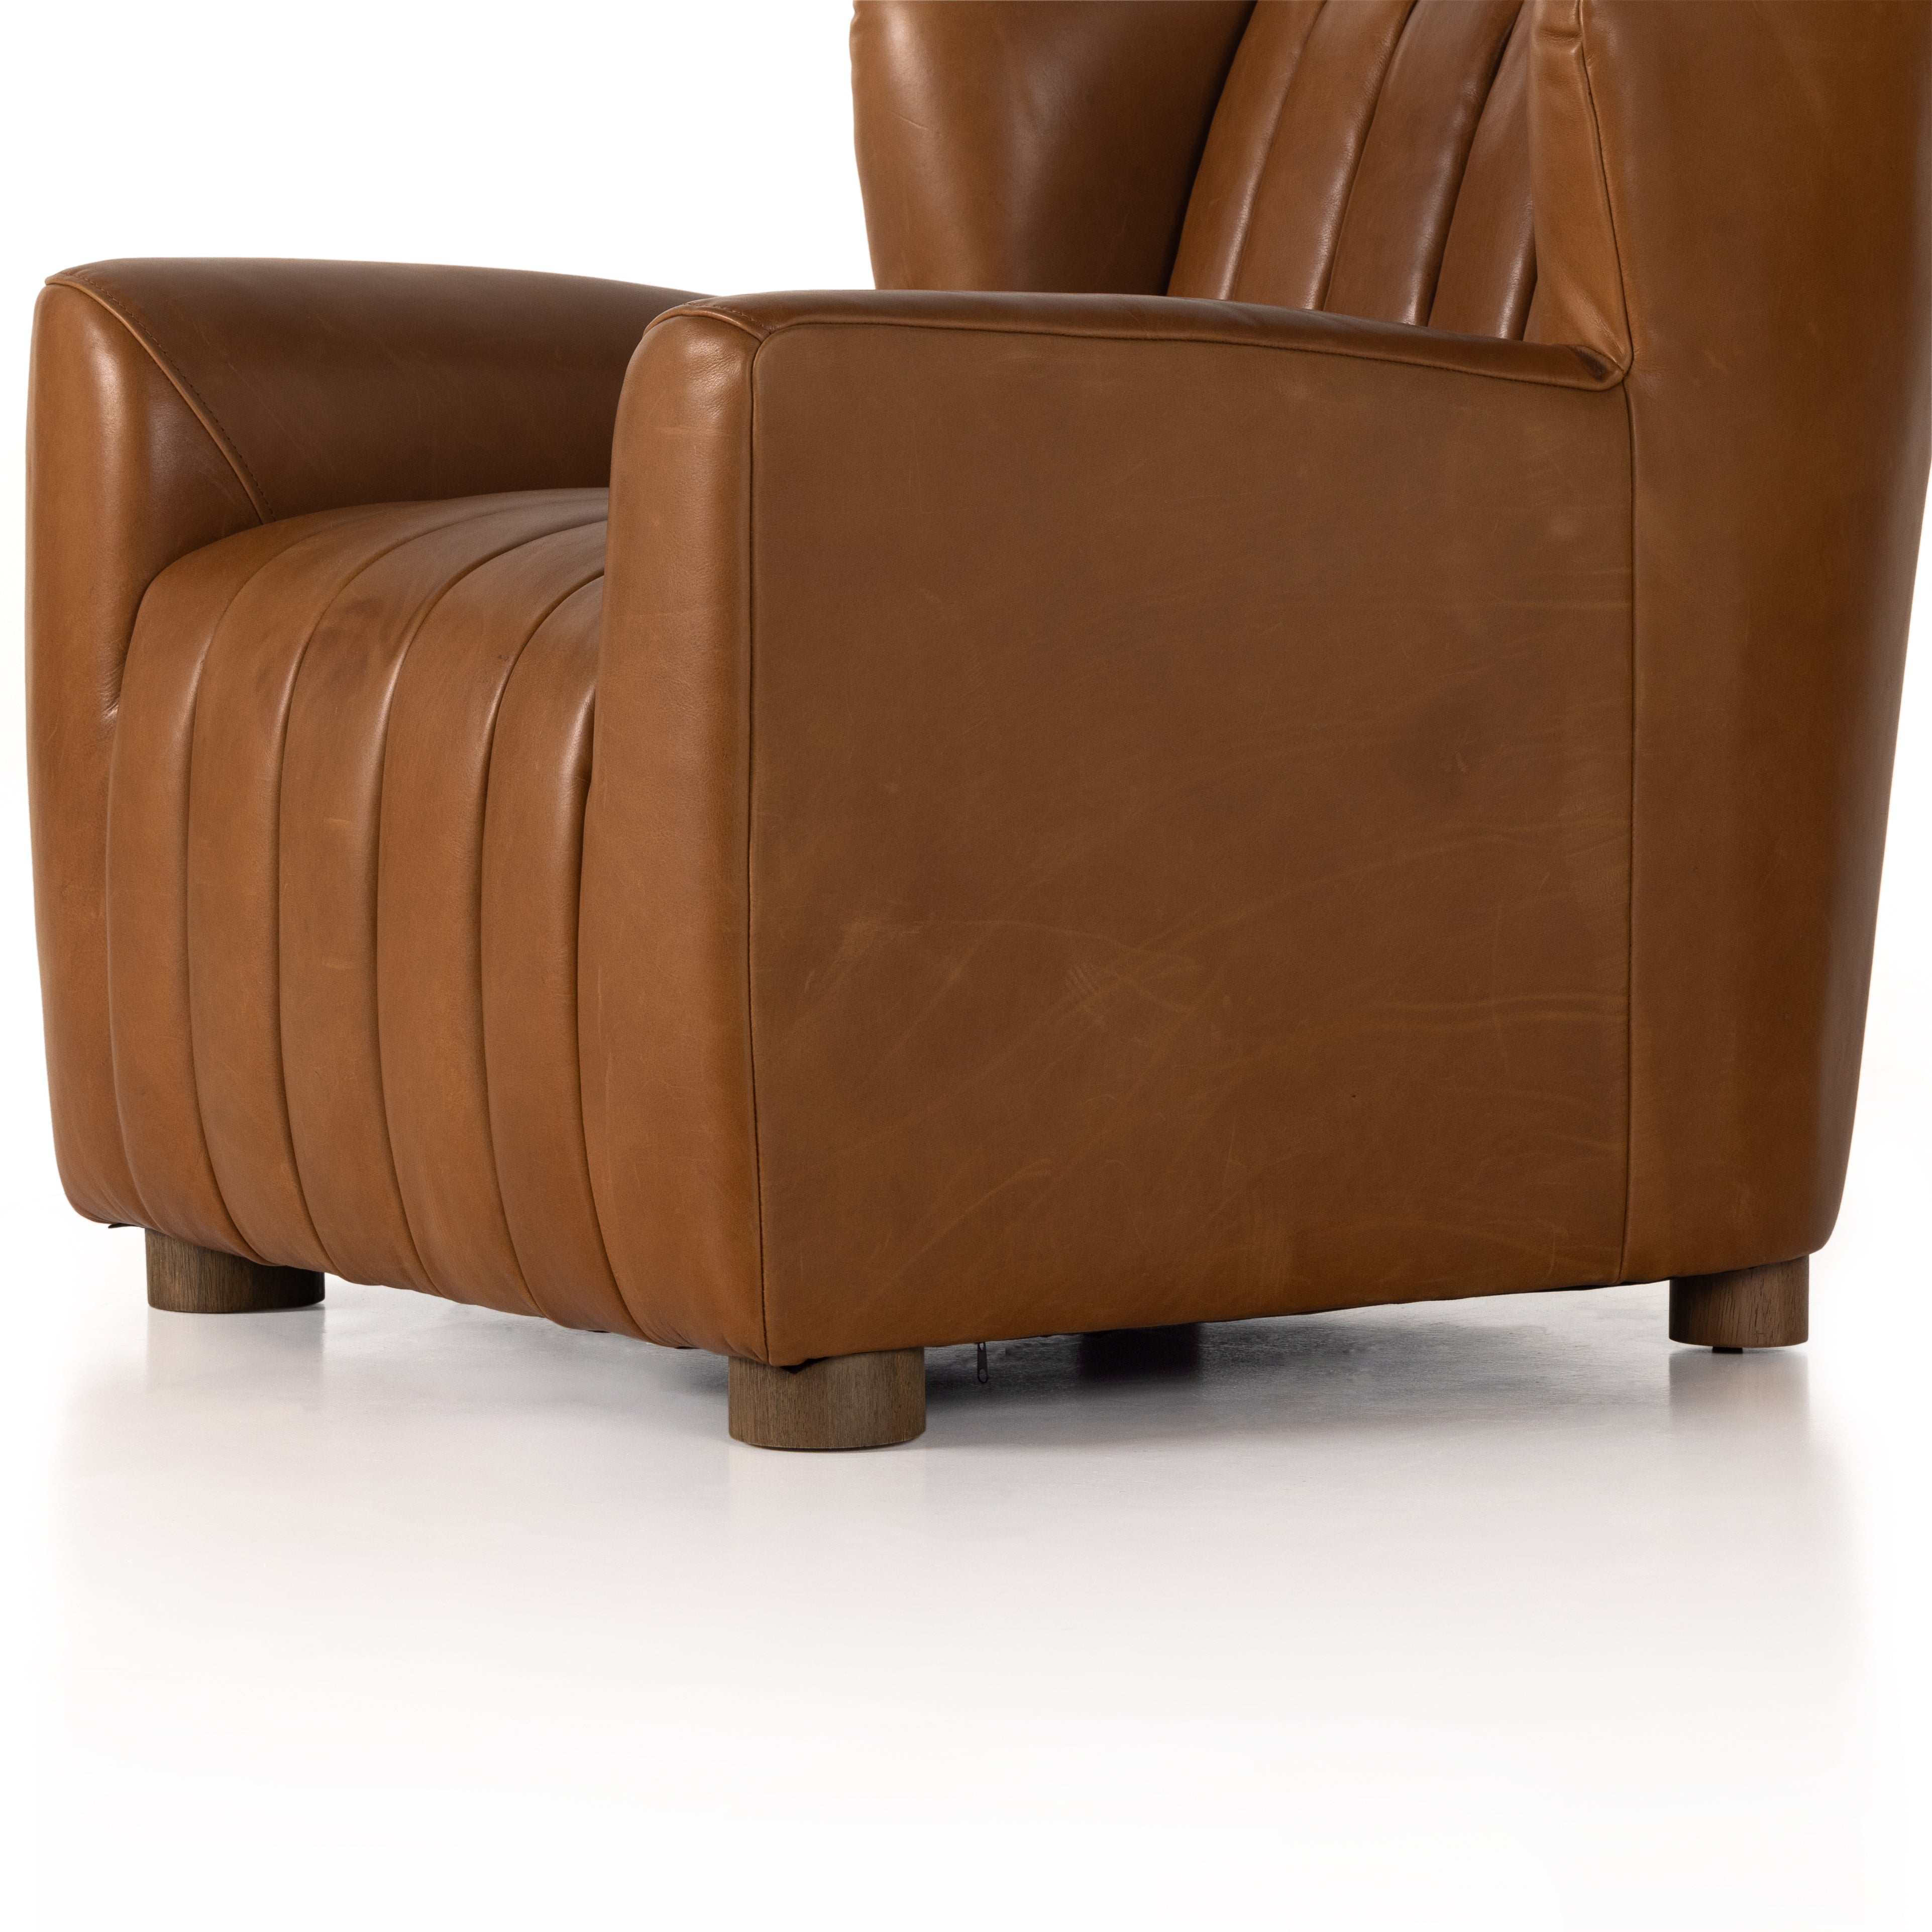 The classic wing-back club chair adopts heavy channeling for an even-comfier sit. Tobacco top-grain leather brings this retro lounge-inspired chair up to modern speed. Amethyst Home provides interior design, new construction, custom furniture, and area rugs in the Washington metro area.